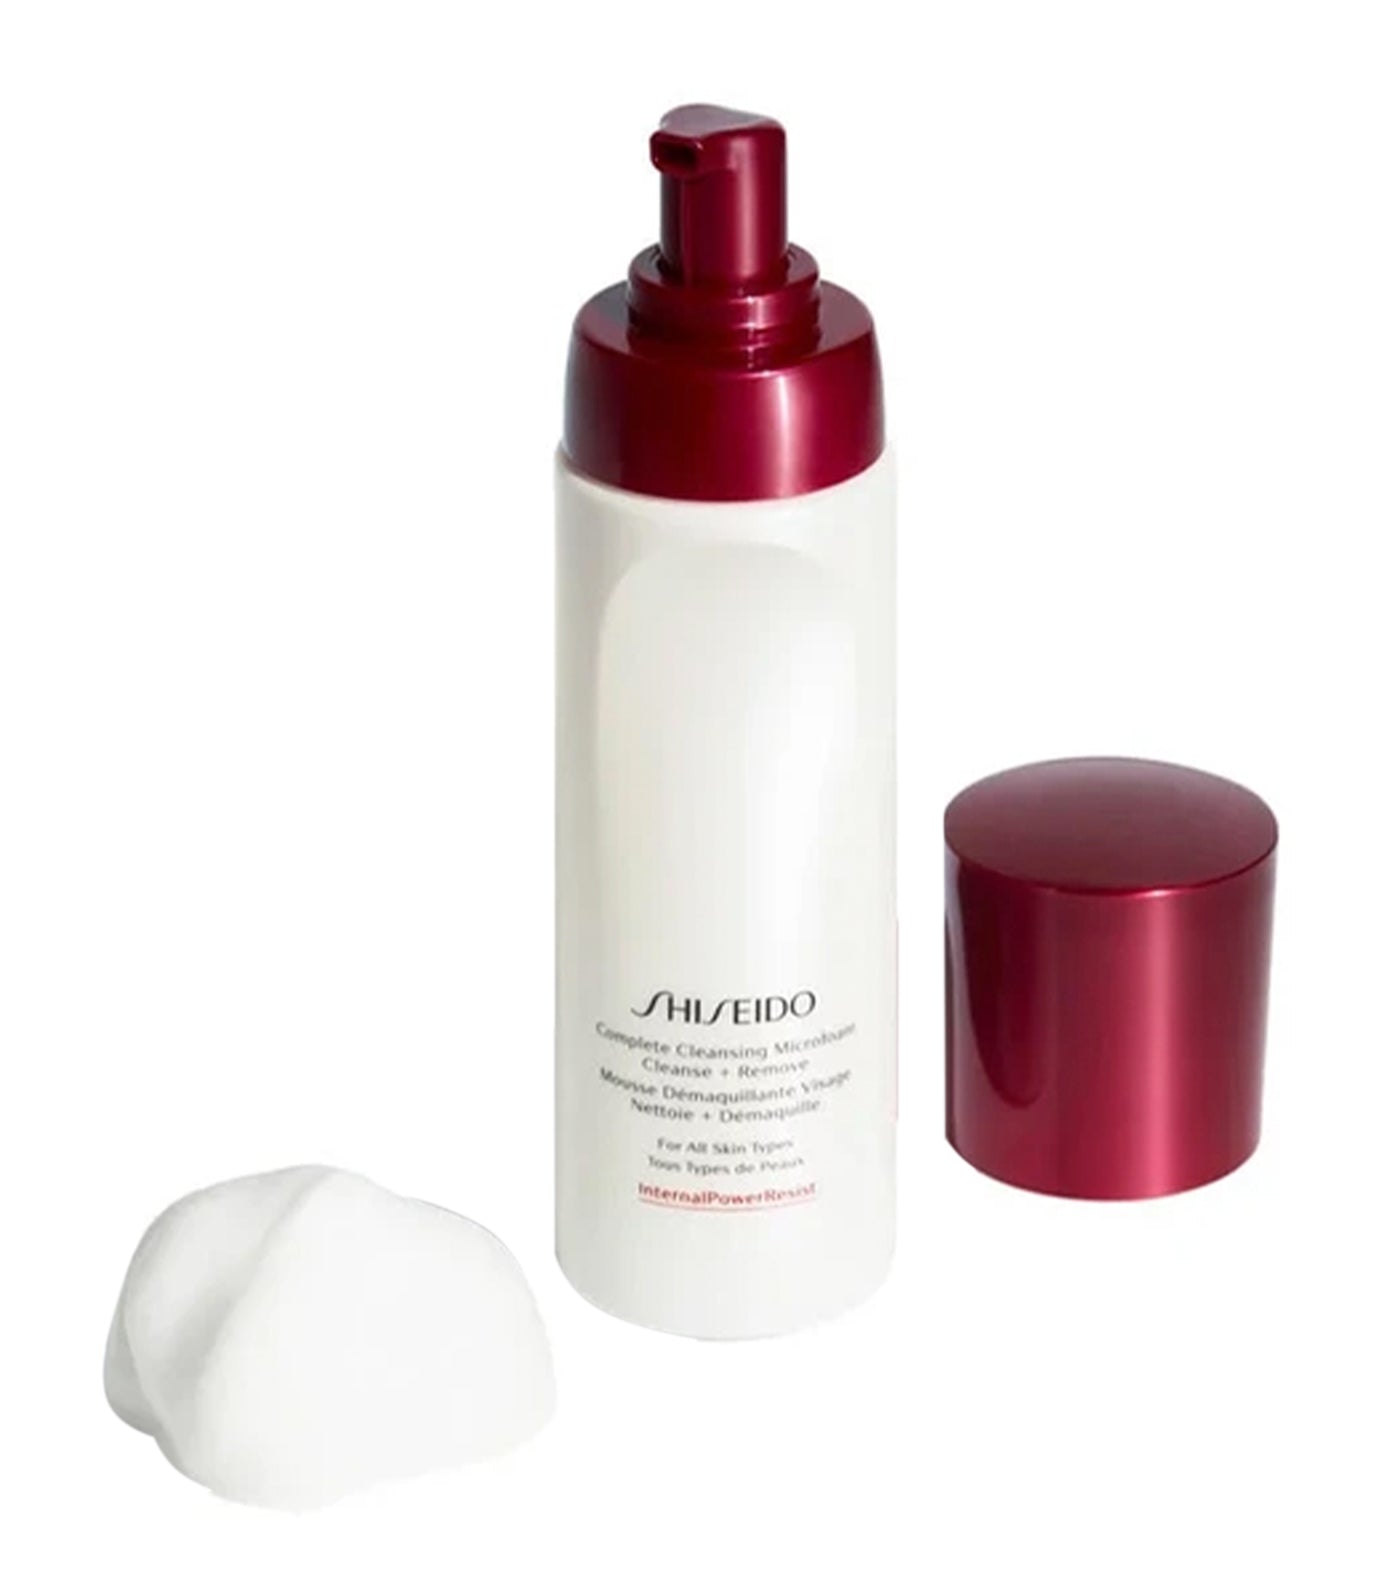 shiseido complete cleansing microfoam